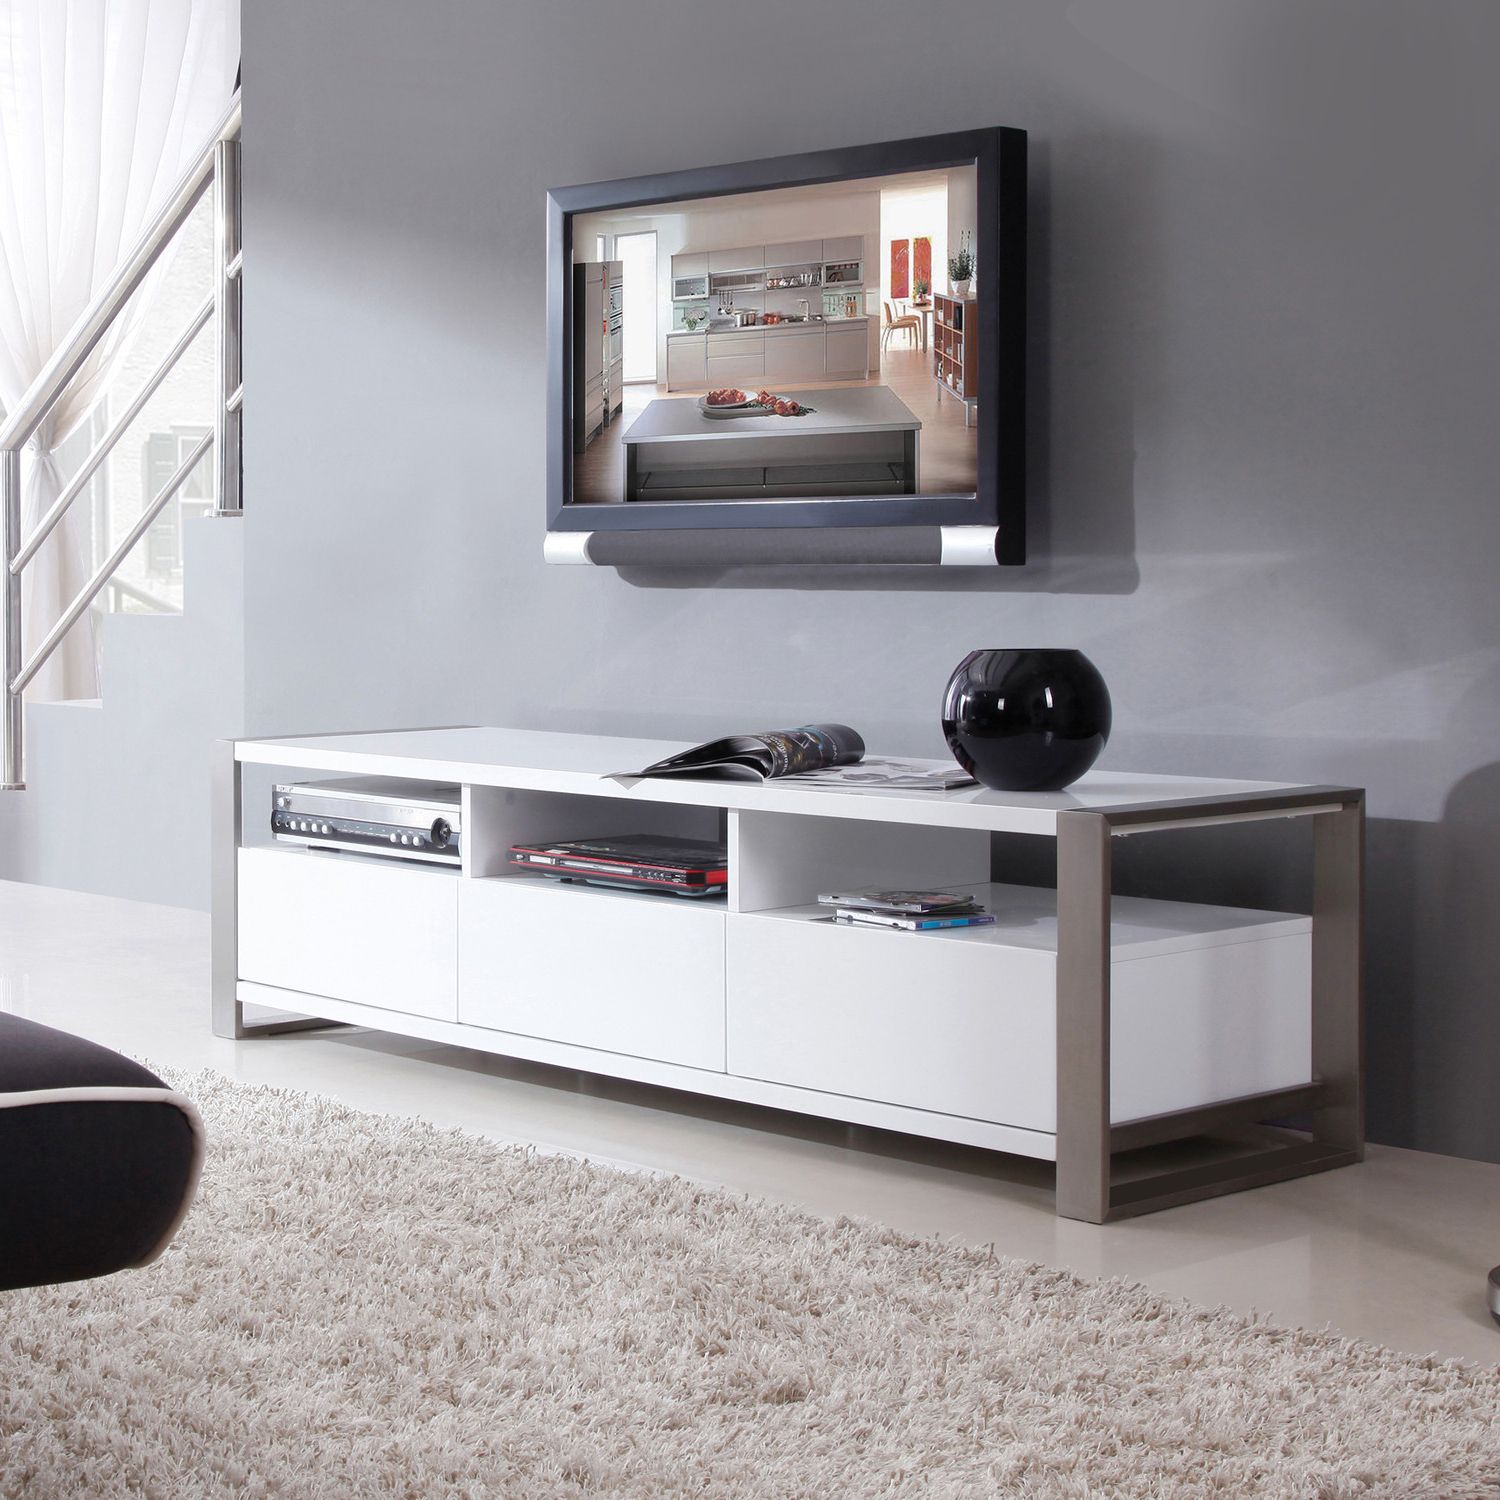 Fashionable Stainless Steel Tv Stand – Ideas On Foter With Regard To Stainless Steel And Acrylic Tv Stands (View 8 of 10)